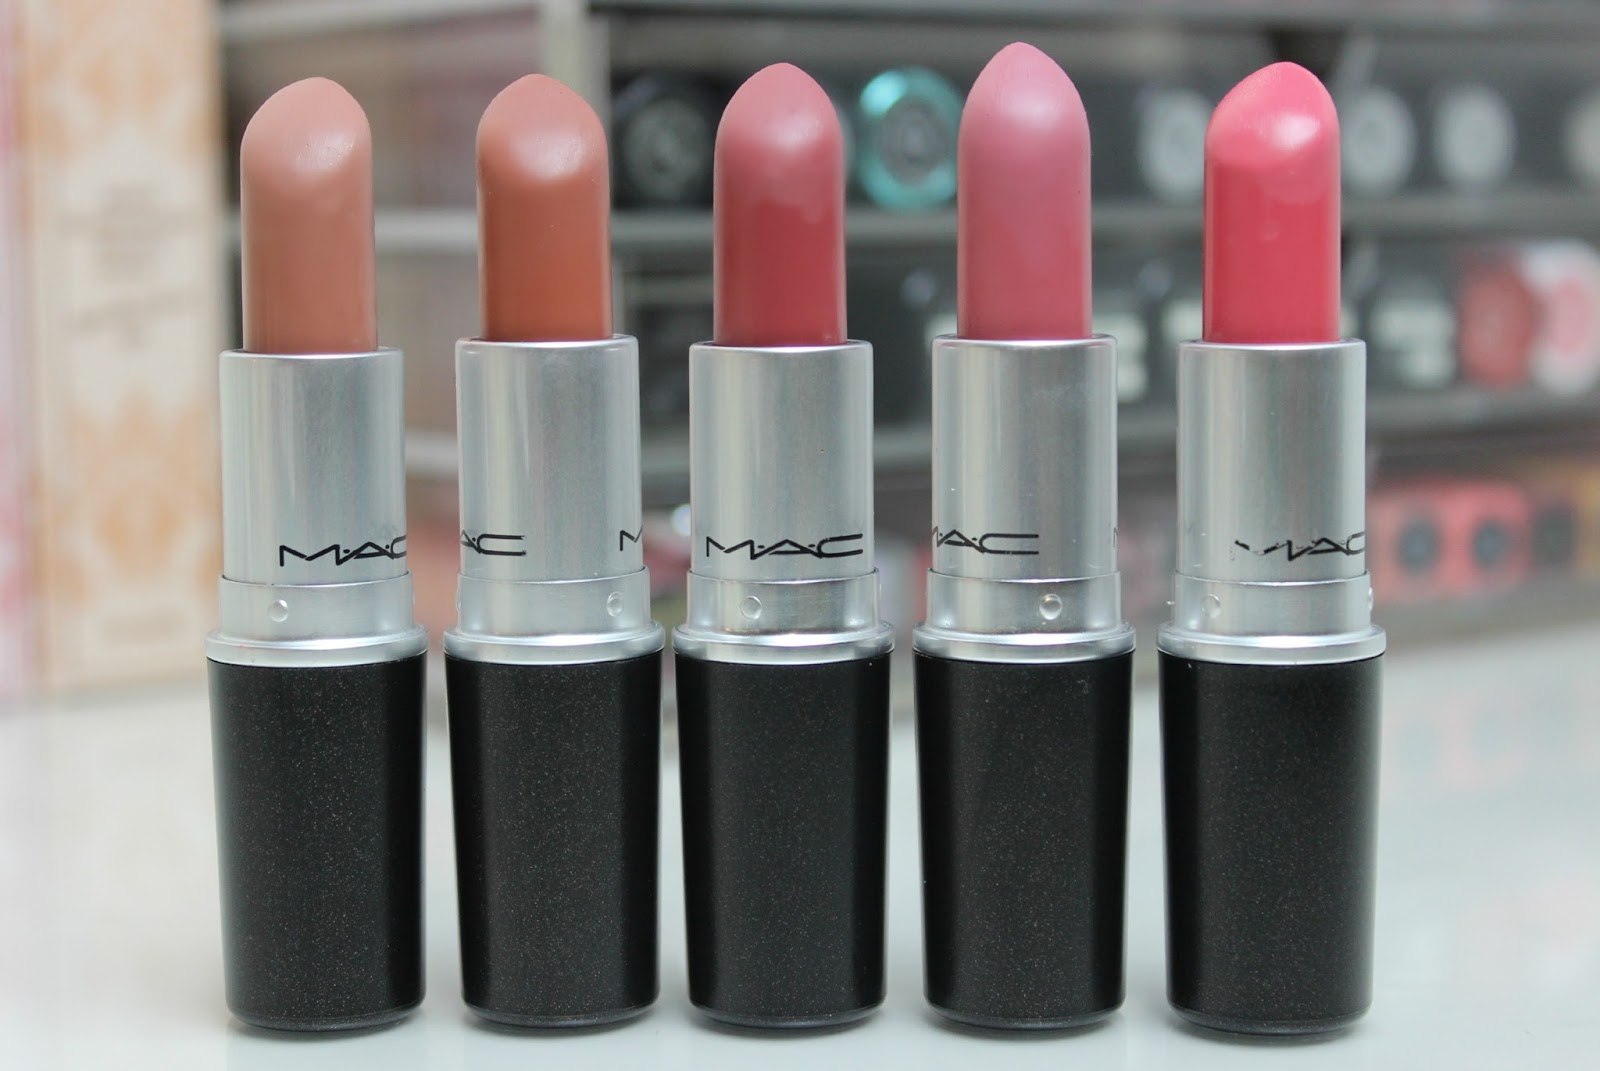 A picture of MAC lipsticks in shades Honey Love, Velvet Teddy, Mehr, Pink Plaid and Chatterbox